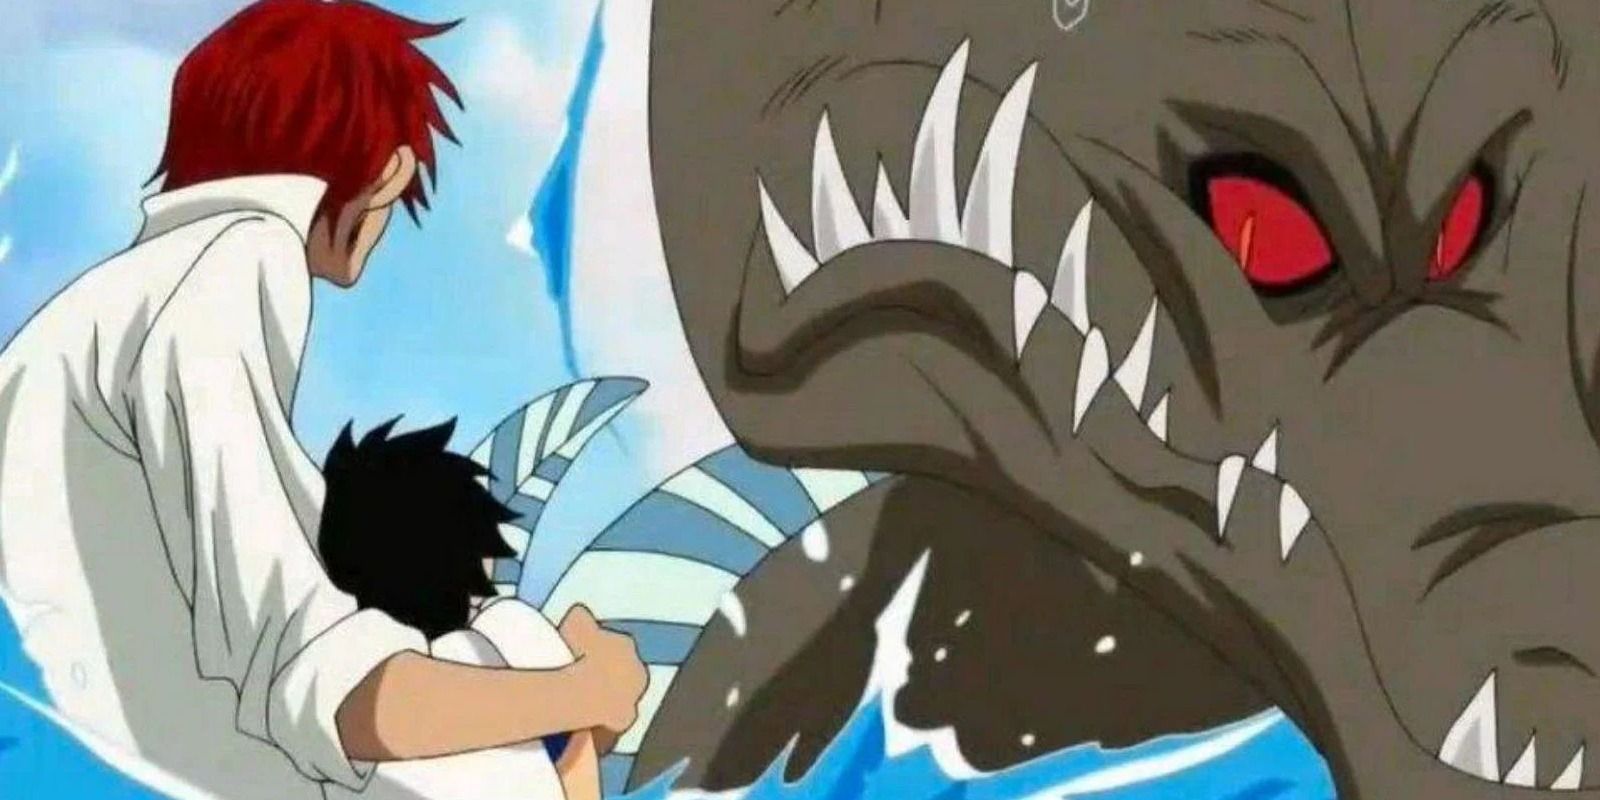 Shanks rescues young Luffy from Sea King in One Piece.